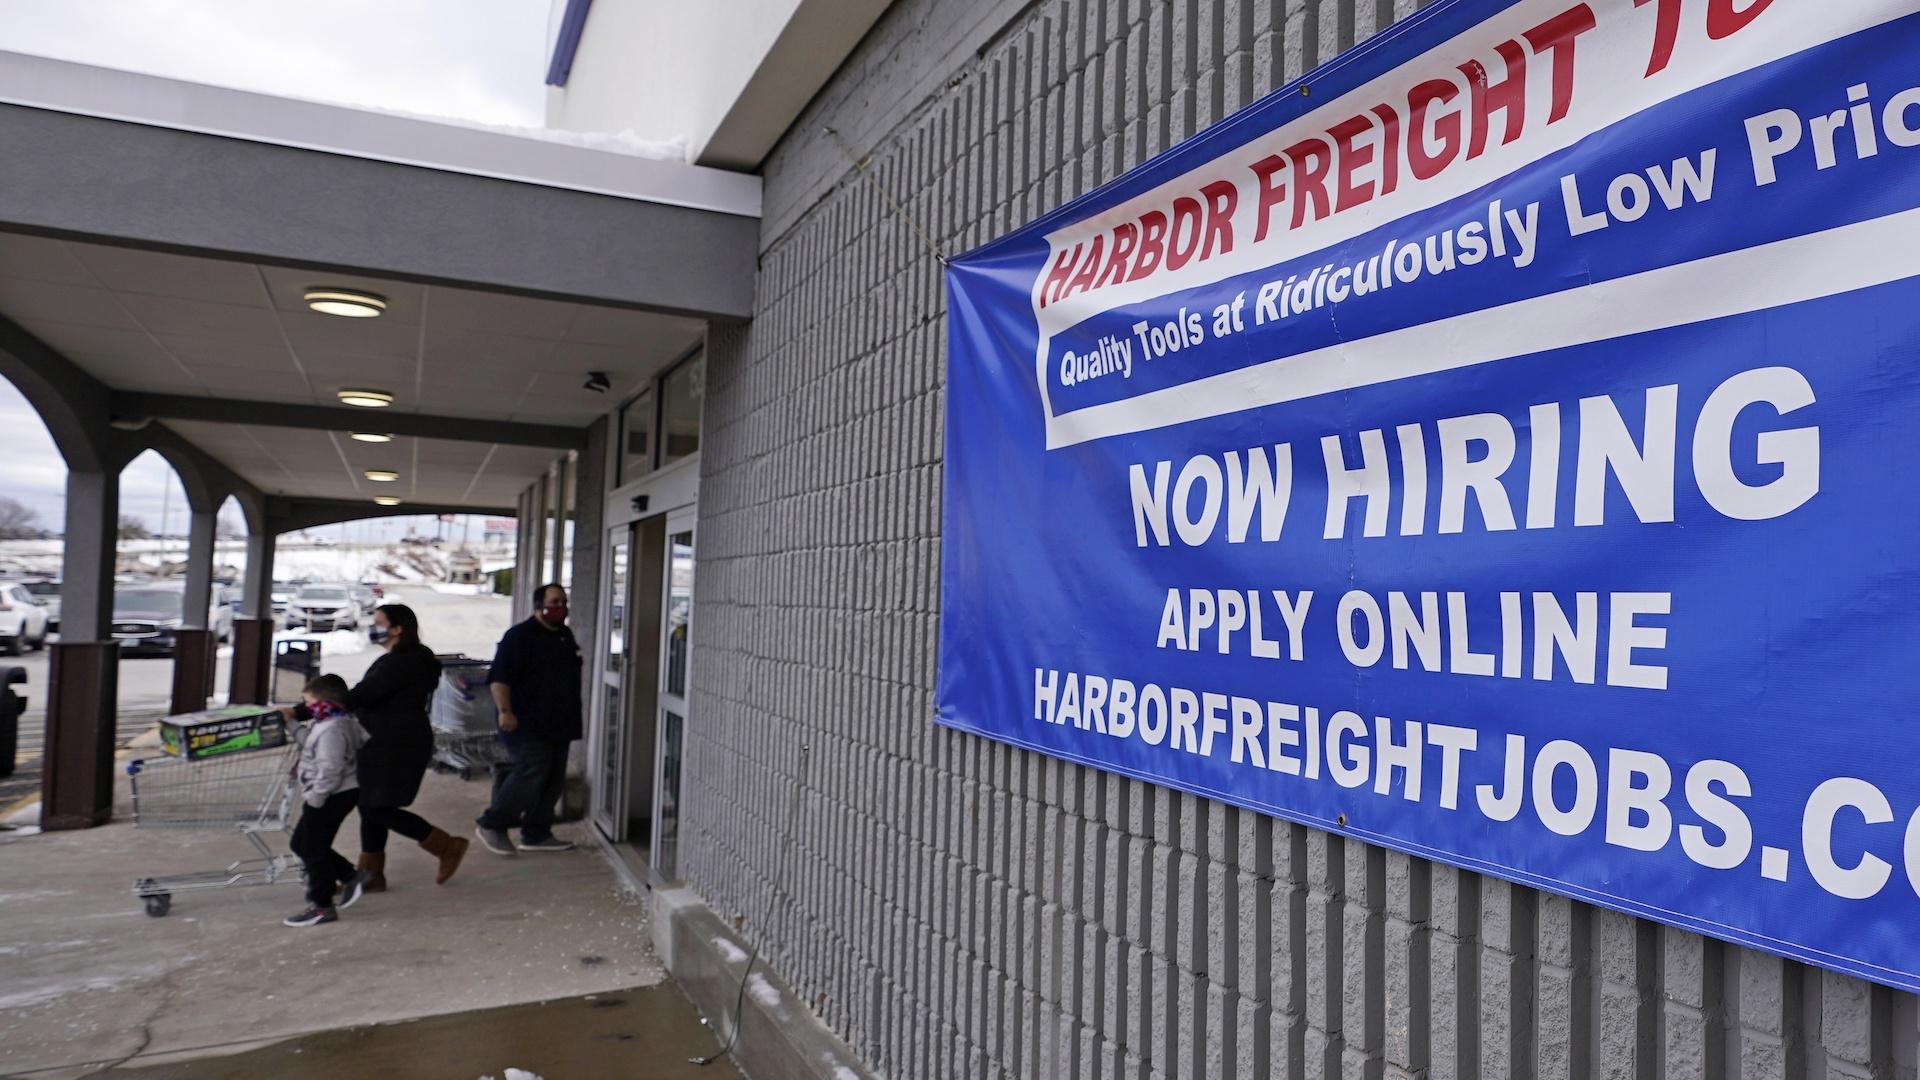 In this Dec. 10, 2020 file photo, a "Now Hiring" sign hangs on the front wall of a Harbor Freight Tools store in Manchester, N.H. (AP Photo/Charles Krupa, File)